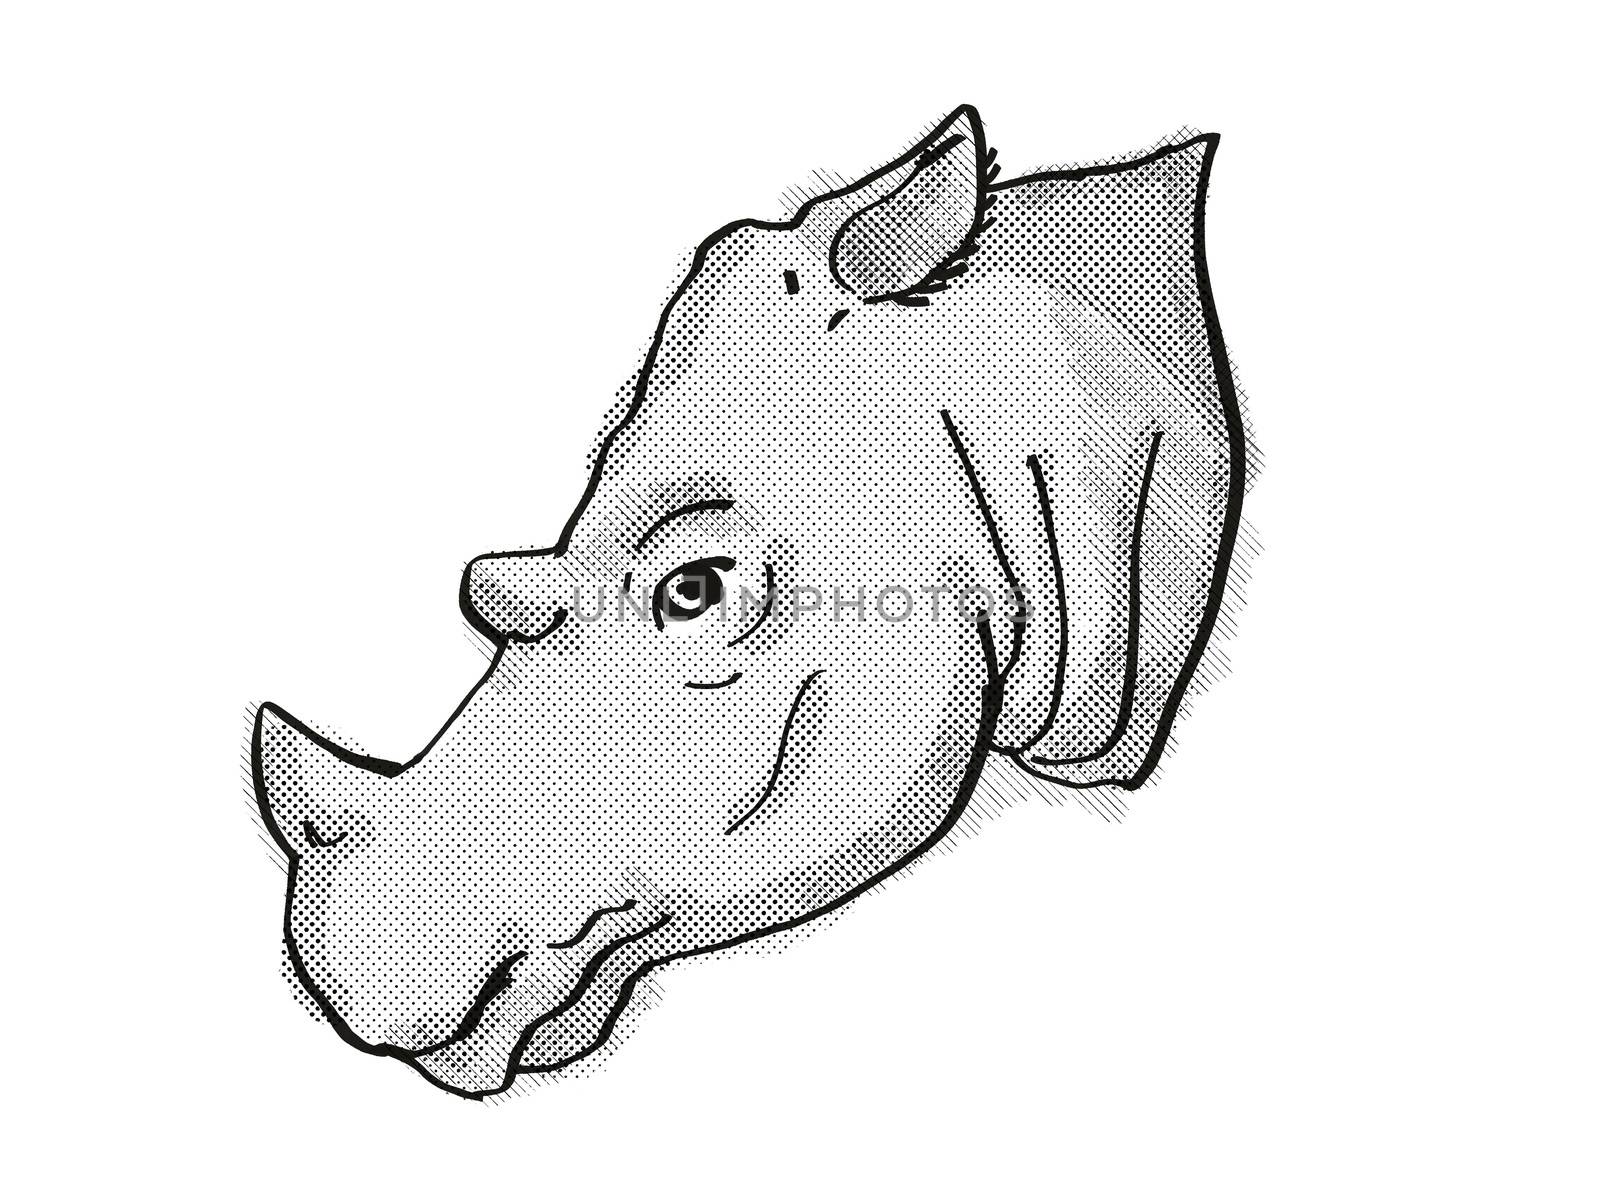 Retro cartoon style drawing of head of a Sumatran Rhinoceros , an endangered wildlife species on isolated white background done in black and white.